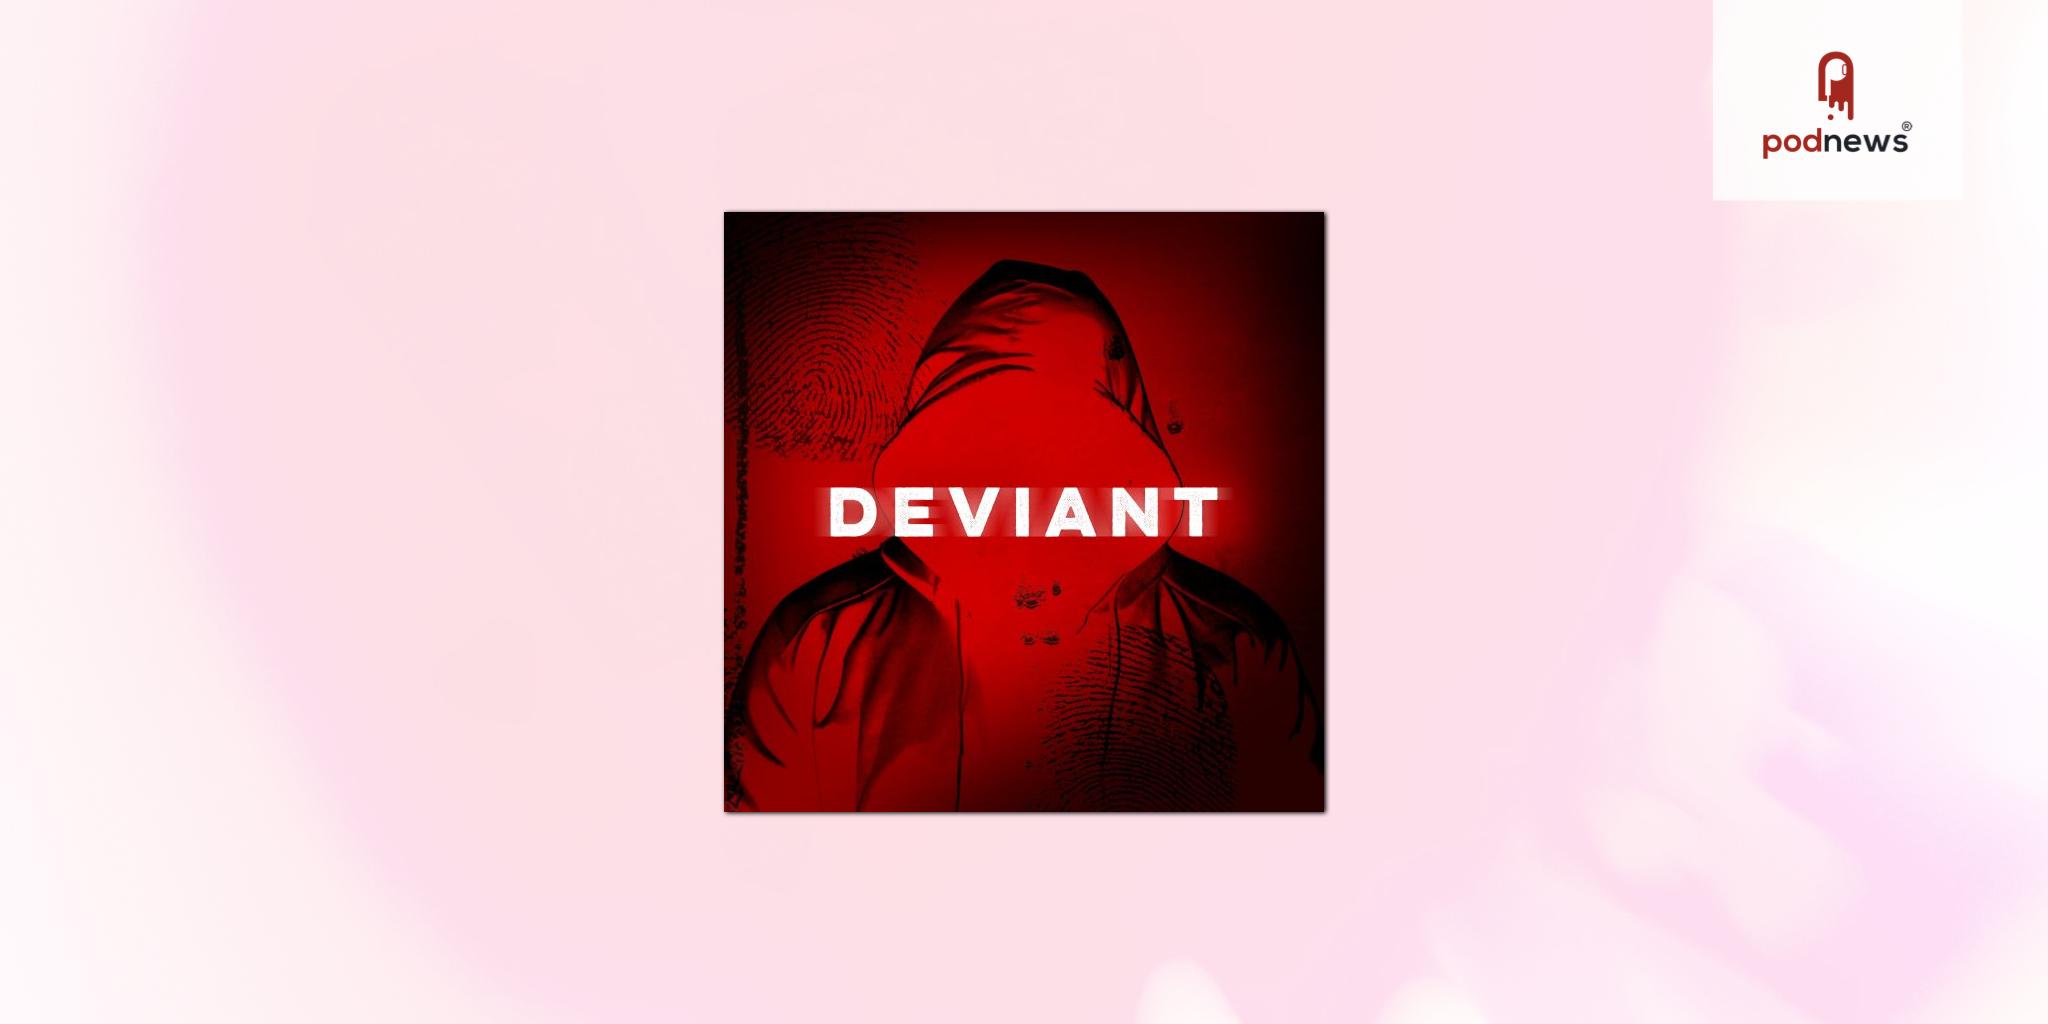 Cold Open Media and Gemini XIII Announce Launch of Riveting New Podcast: DEVIANT